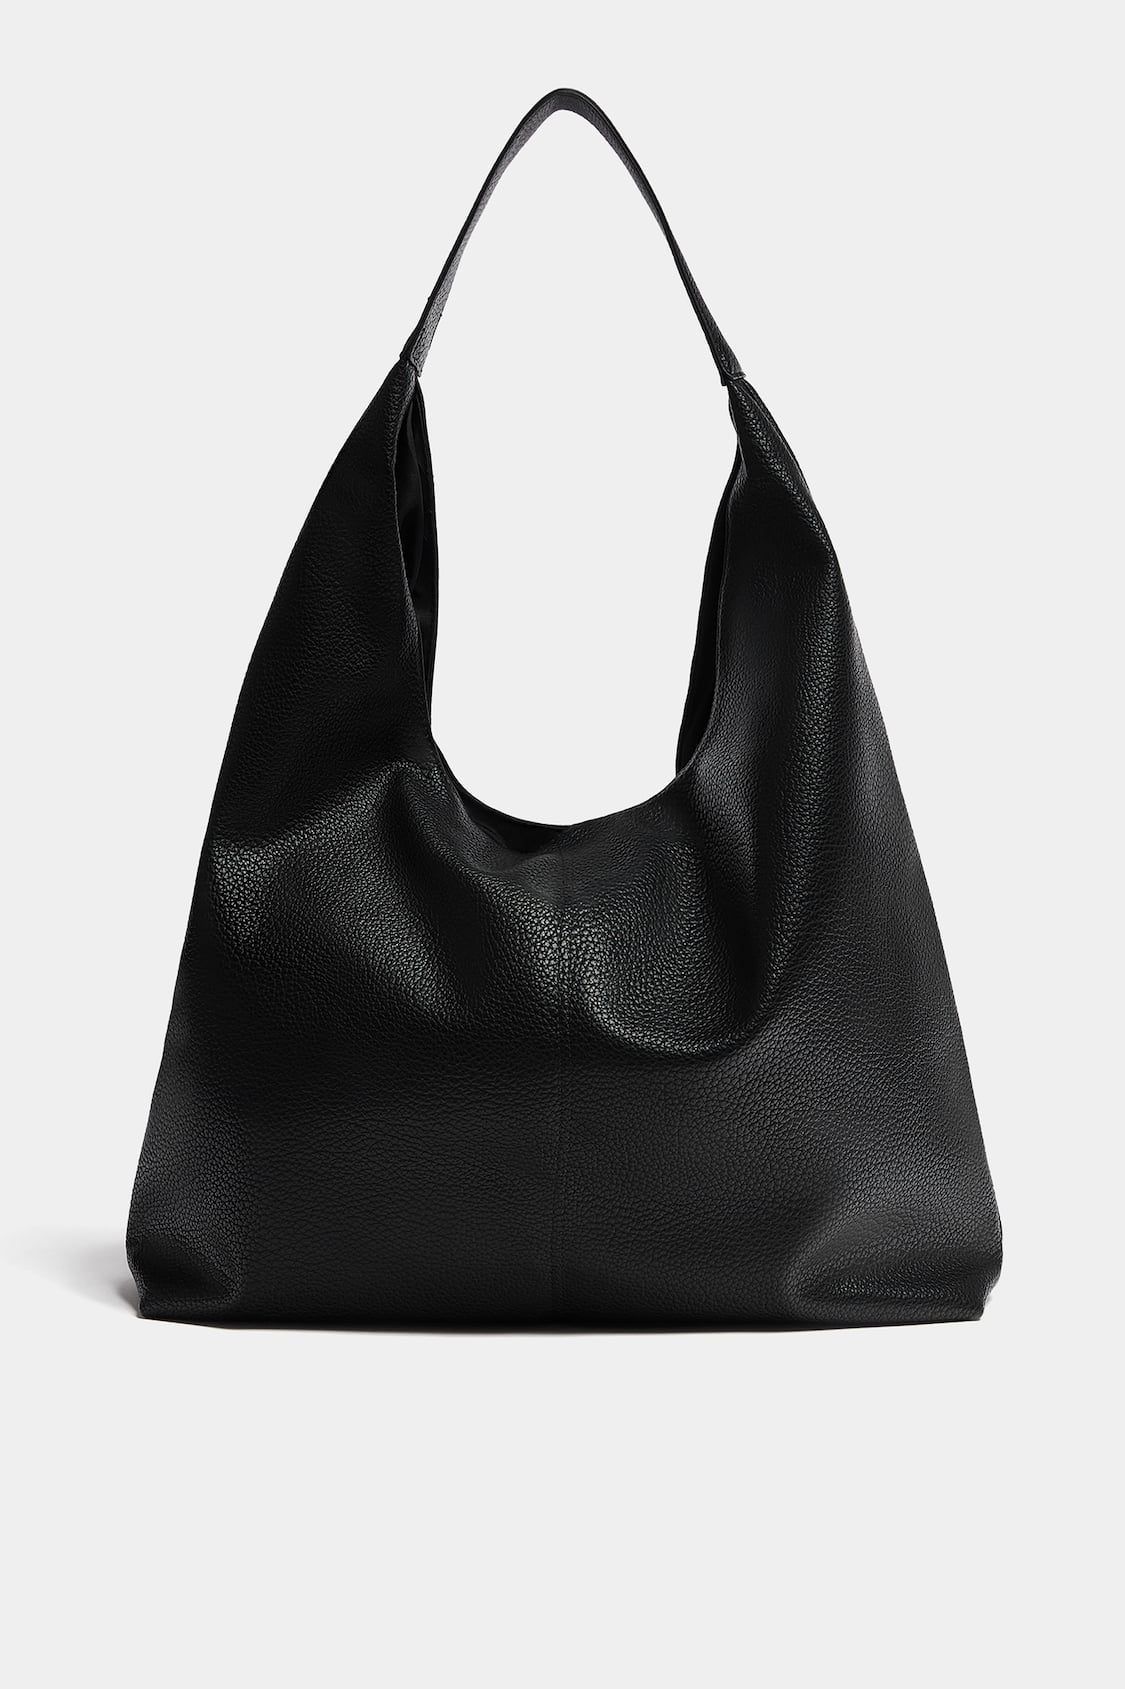 FAVORITE AND FUNCTIONAL MOM BAGS, CONTEMPORARY UNDER $500 - and